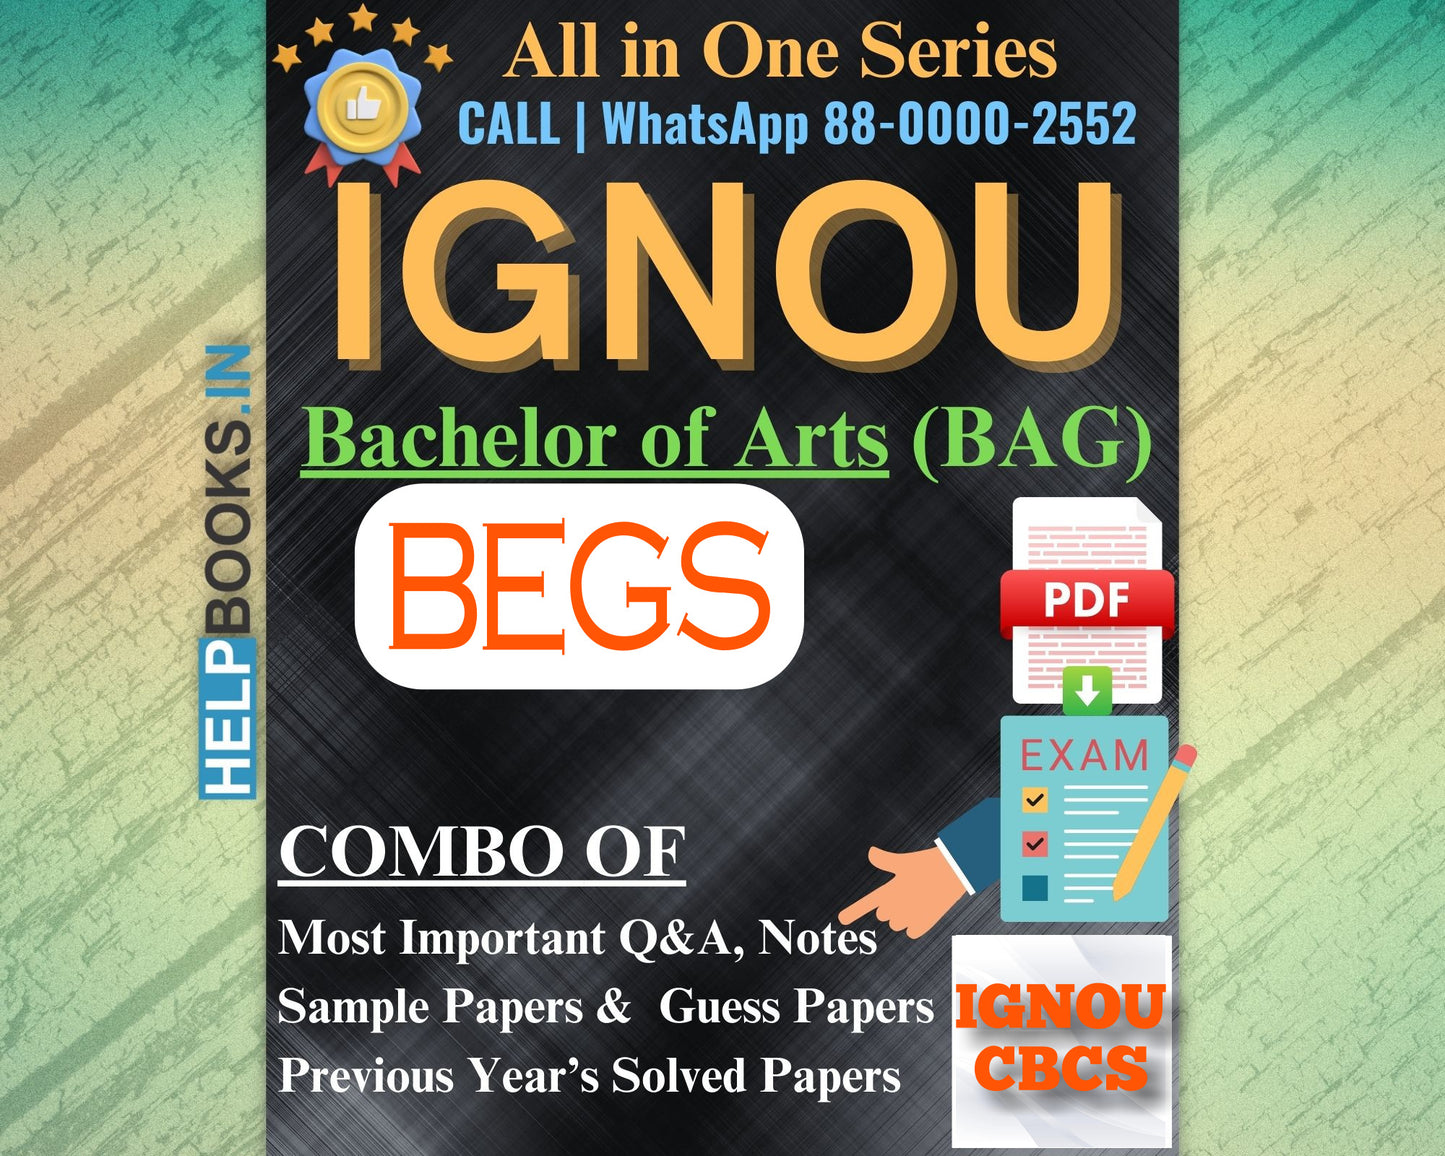 IGNOU BAG Online Study Package: Bachelor of Arts (BA) - Previous Year’s Solved Papers, Q&A, Exam Notes, Sample Papers, Guess Papers-BEGS183, BEGS185, BEGS186